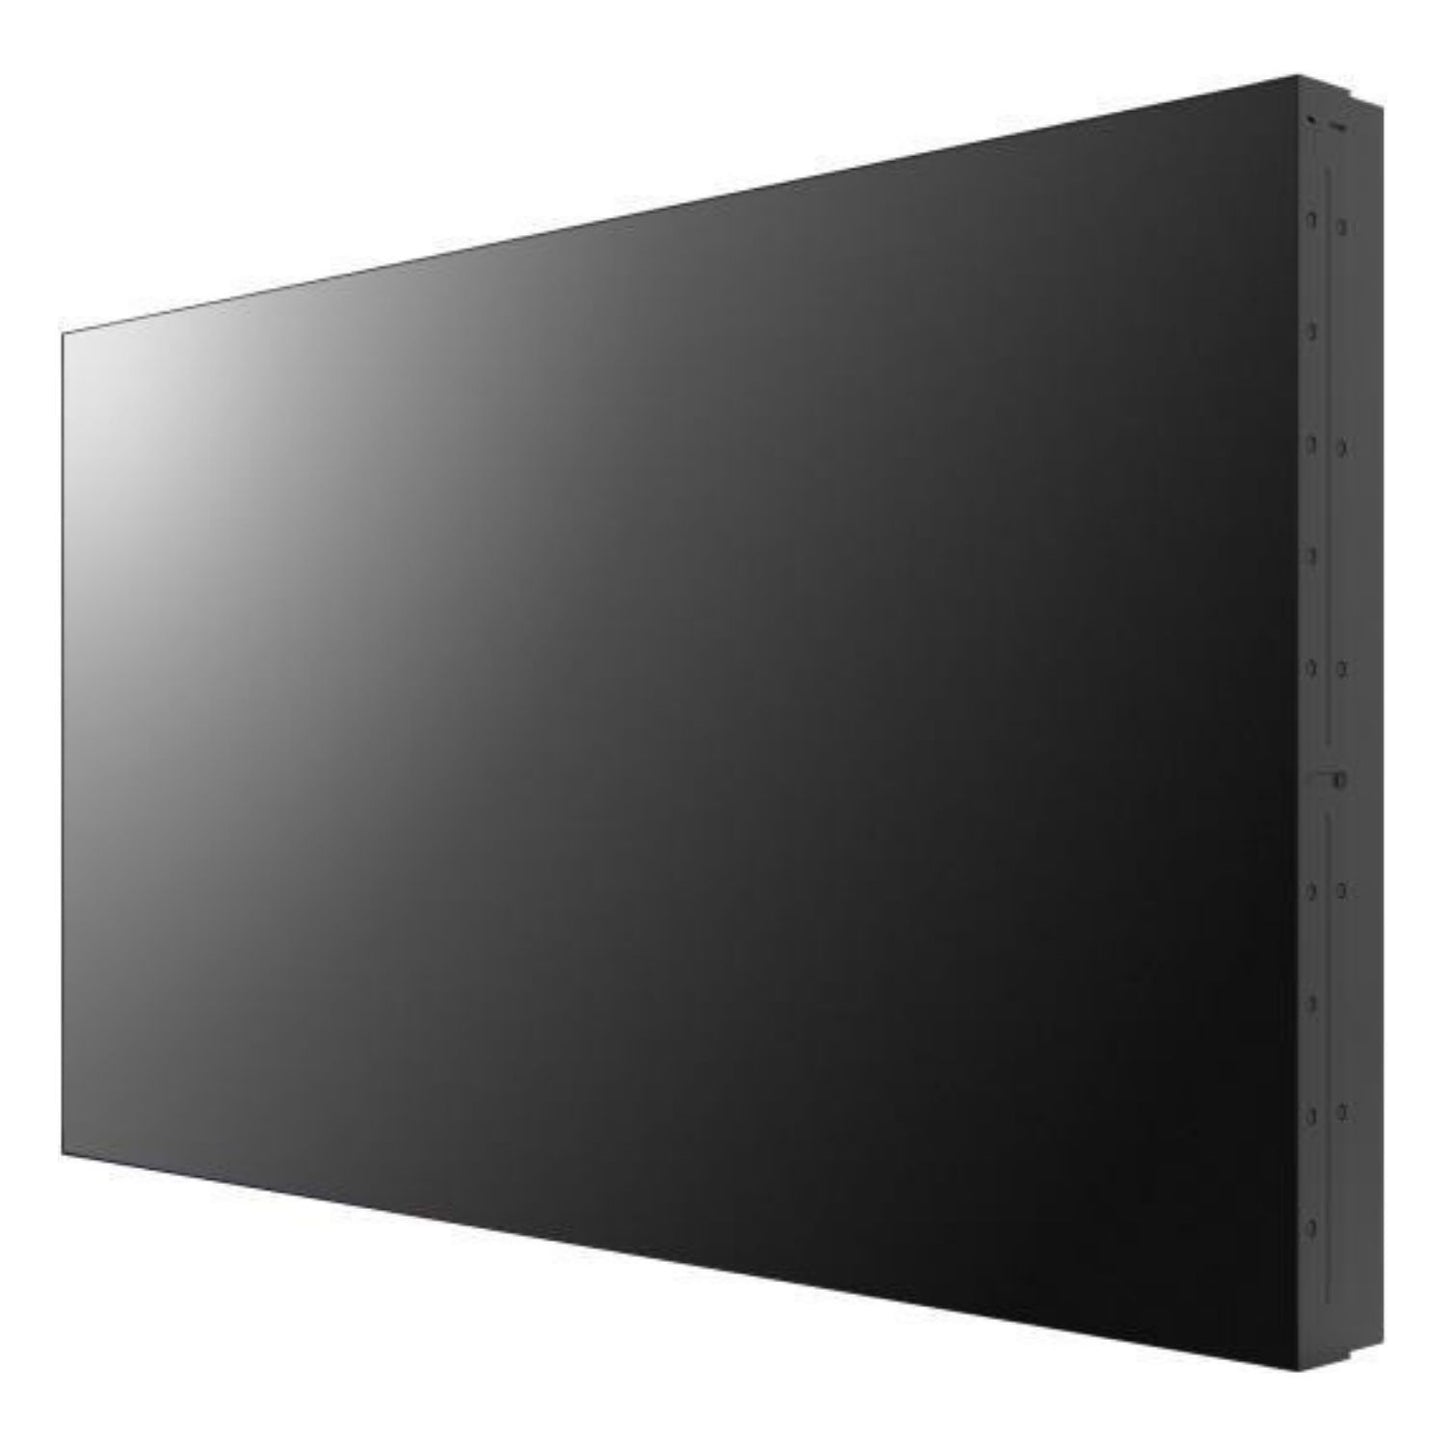 DS-D2055LE-G - 55-inch 1.8mm LCD Display Unit